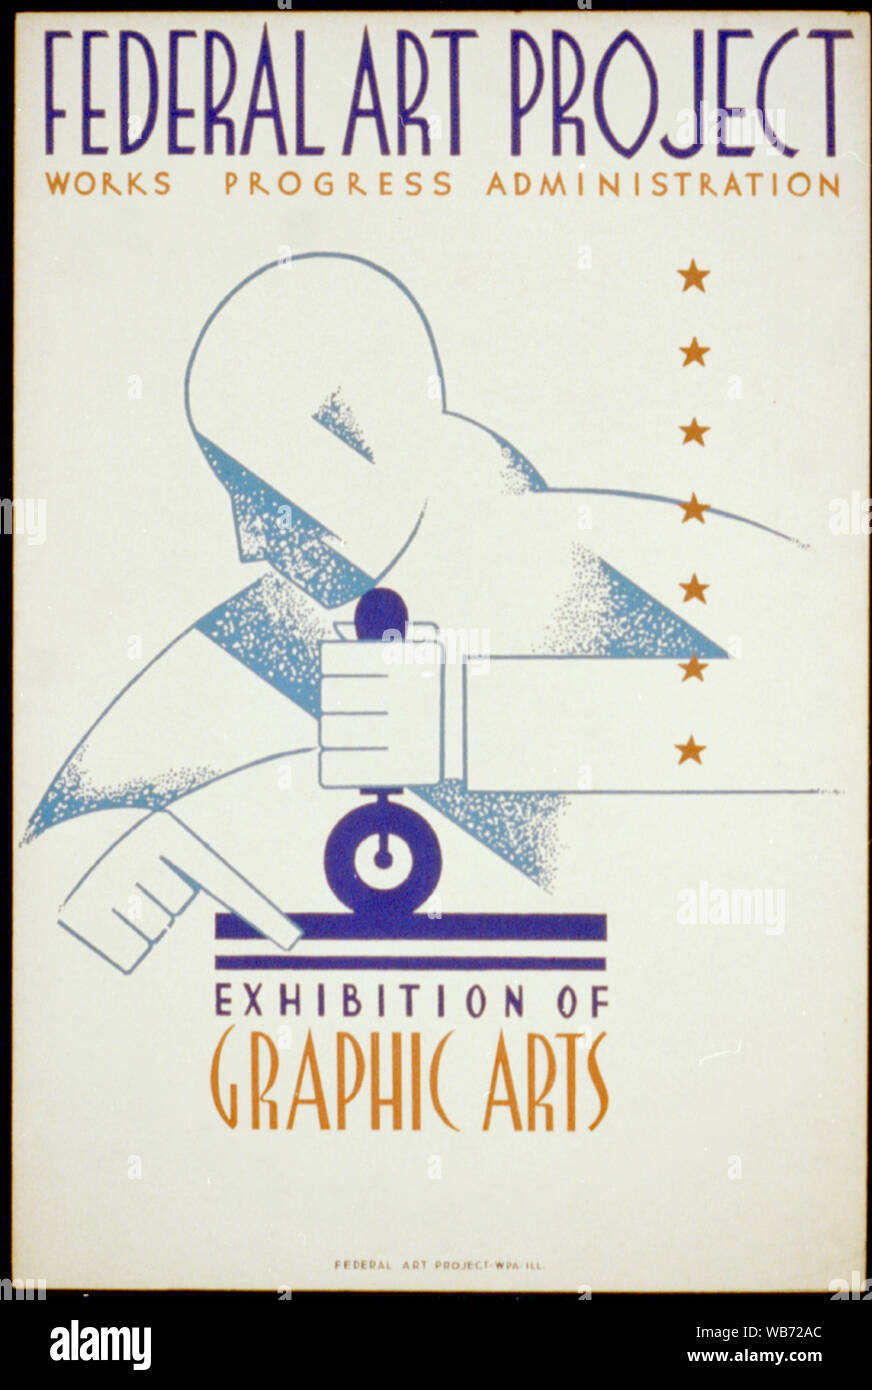 Federal Art Project Works Progress Administration exhibition of graphic arts Abstract: Poster for Federal Art Project exhibition of graphic arts, showing a man inking a plate with a roller. Stock Photo